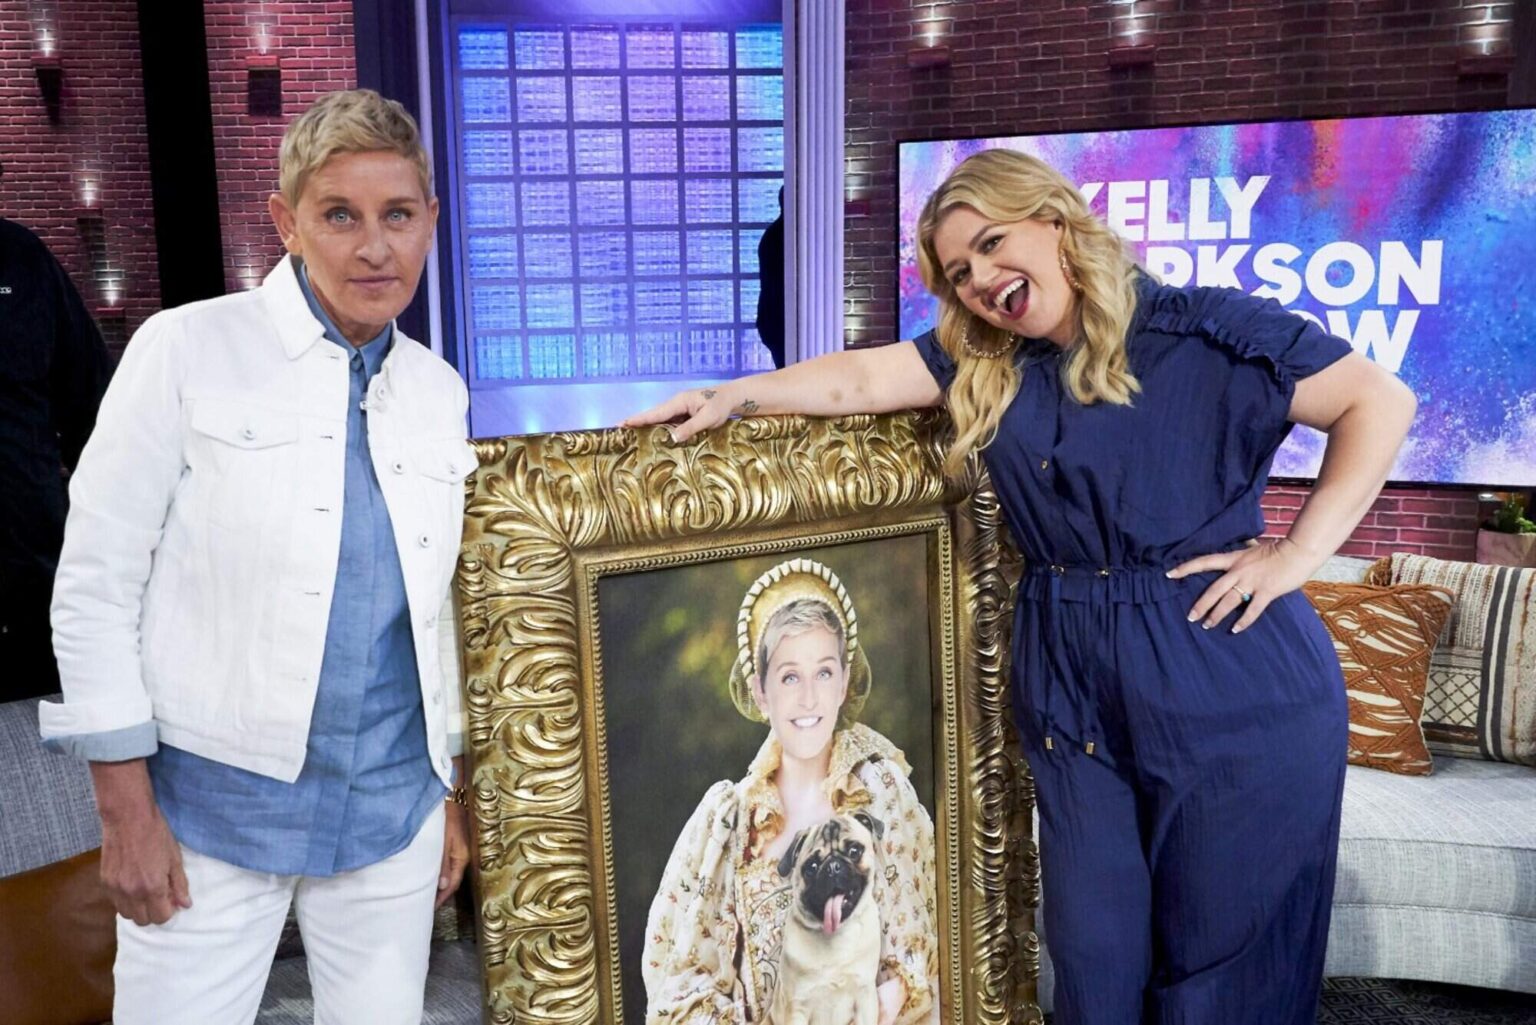 Is Kelly Clarkson the one to steal Ellen's crown as talk show host queen? Here's why 'The Kelly Clarkson Show' could destroy Ellen’s ratings.